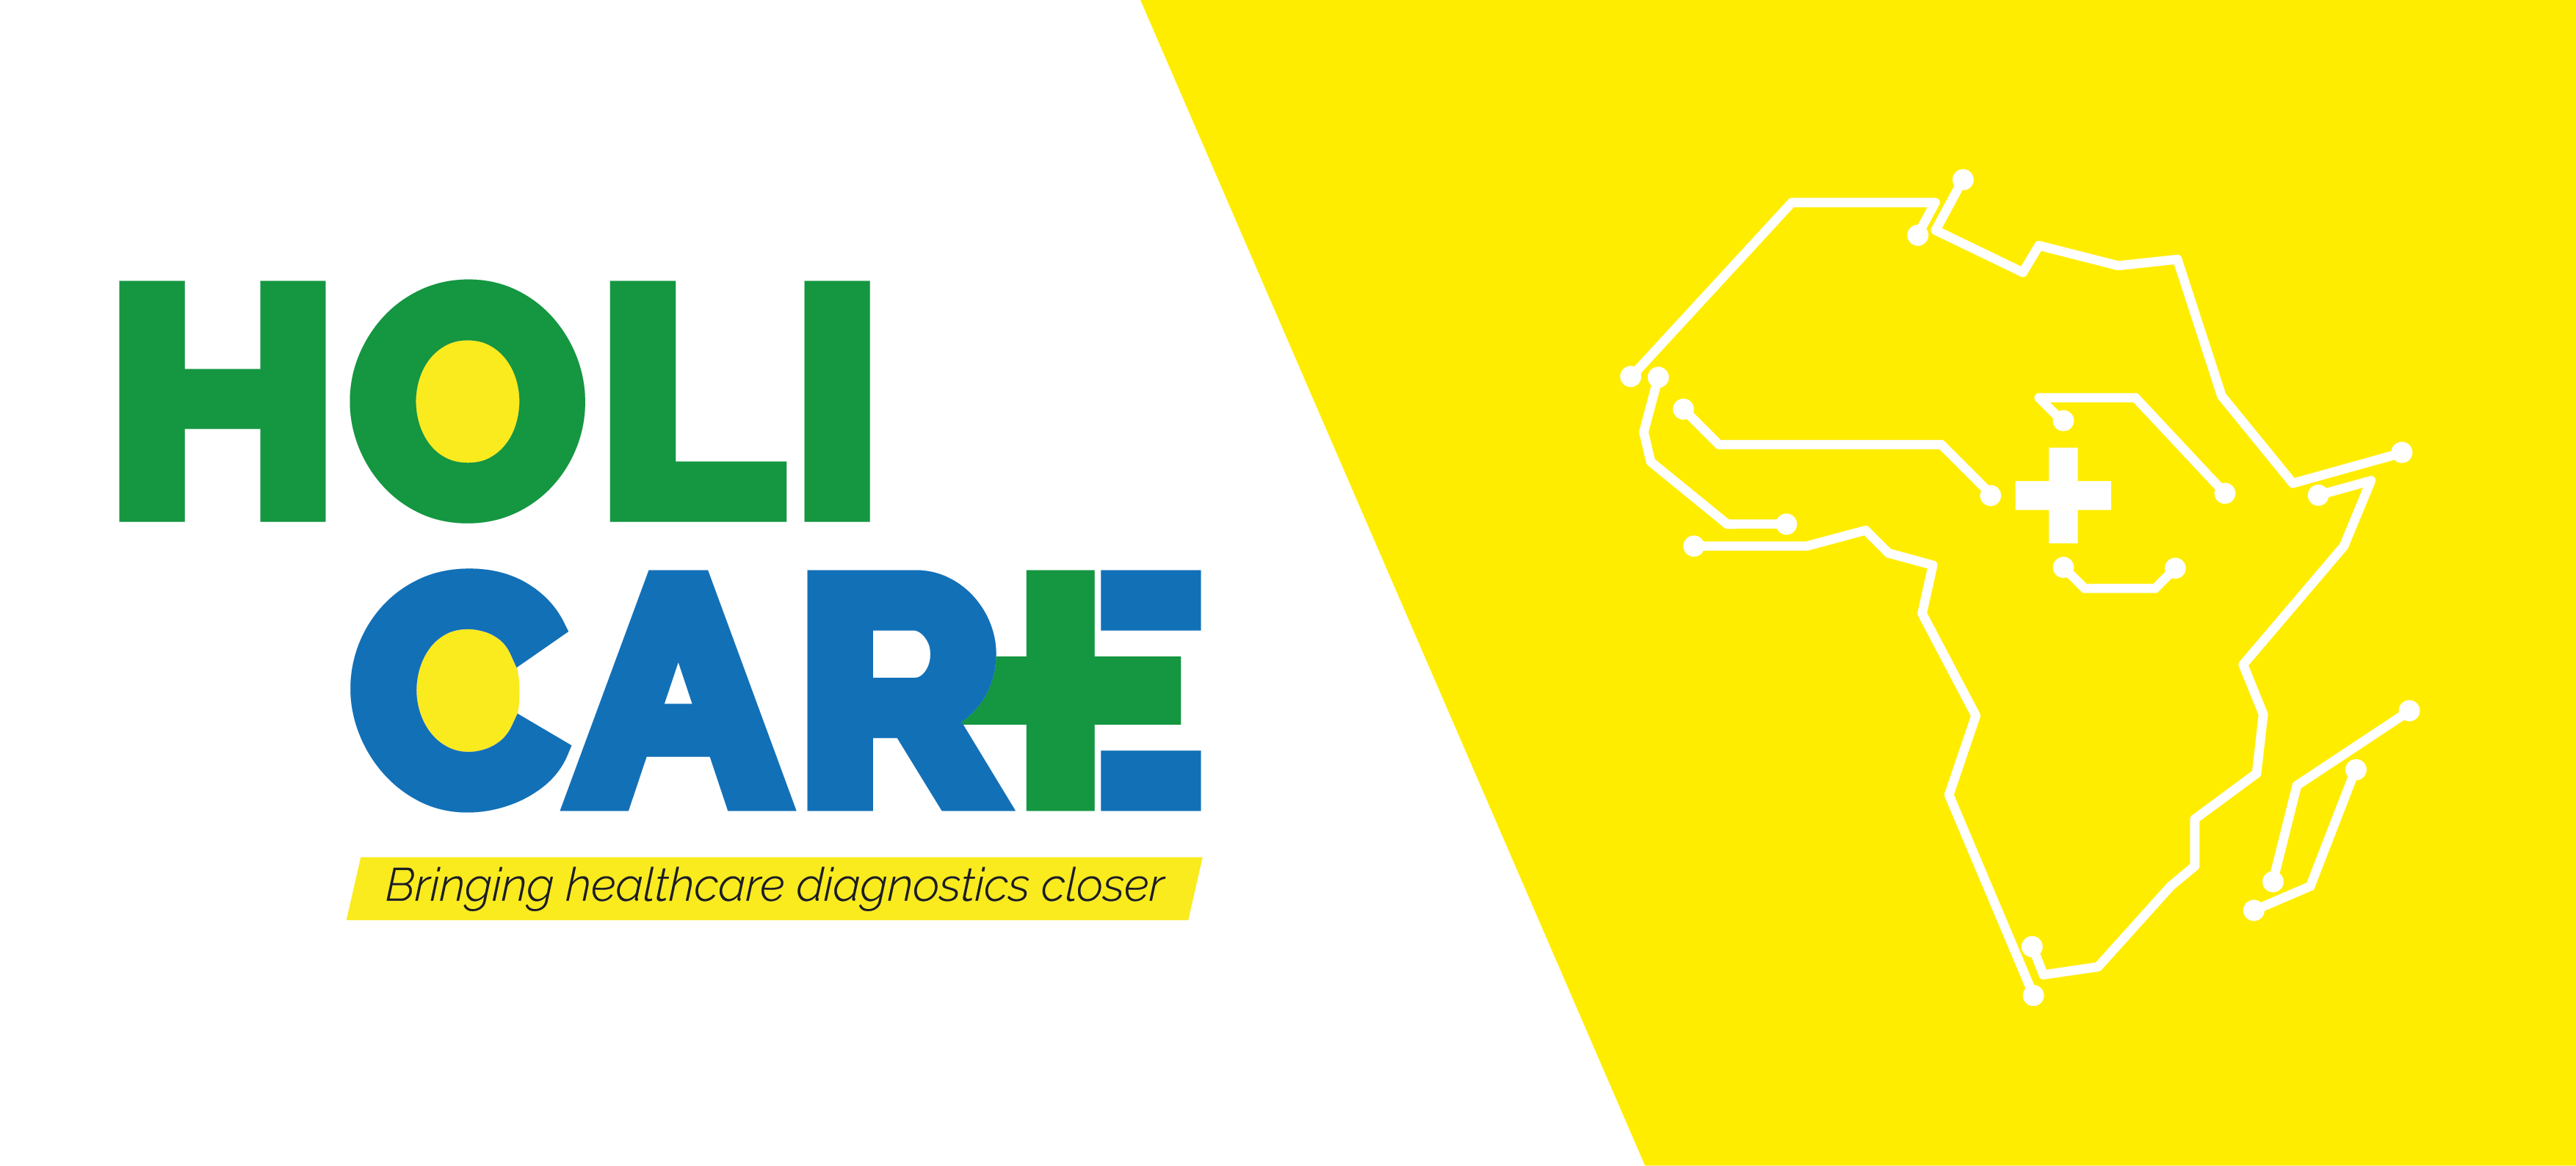 Holicare banner - logo and Africa map in yellow